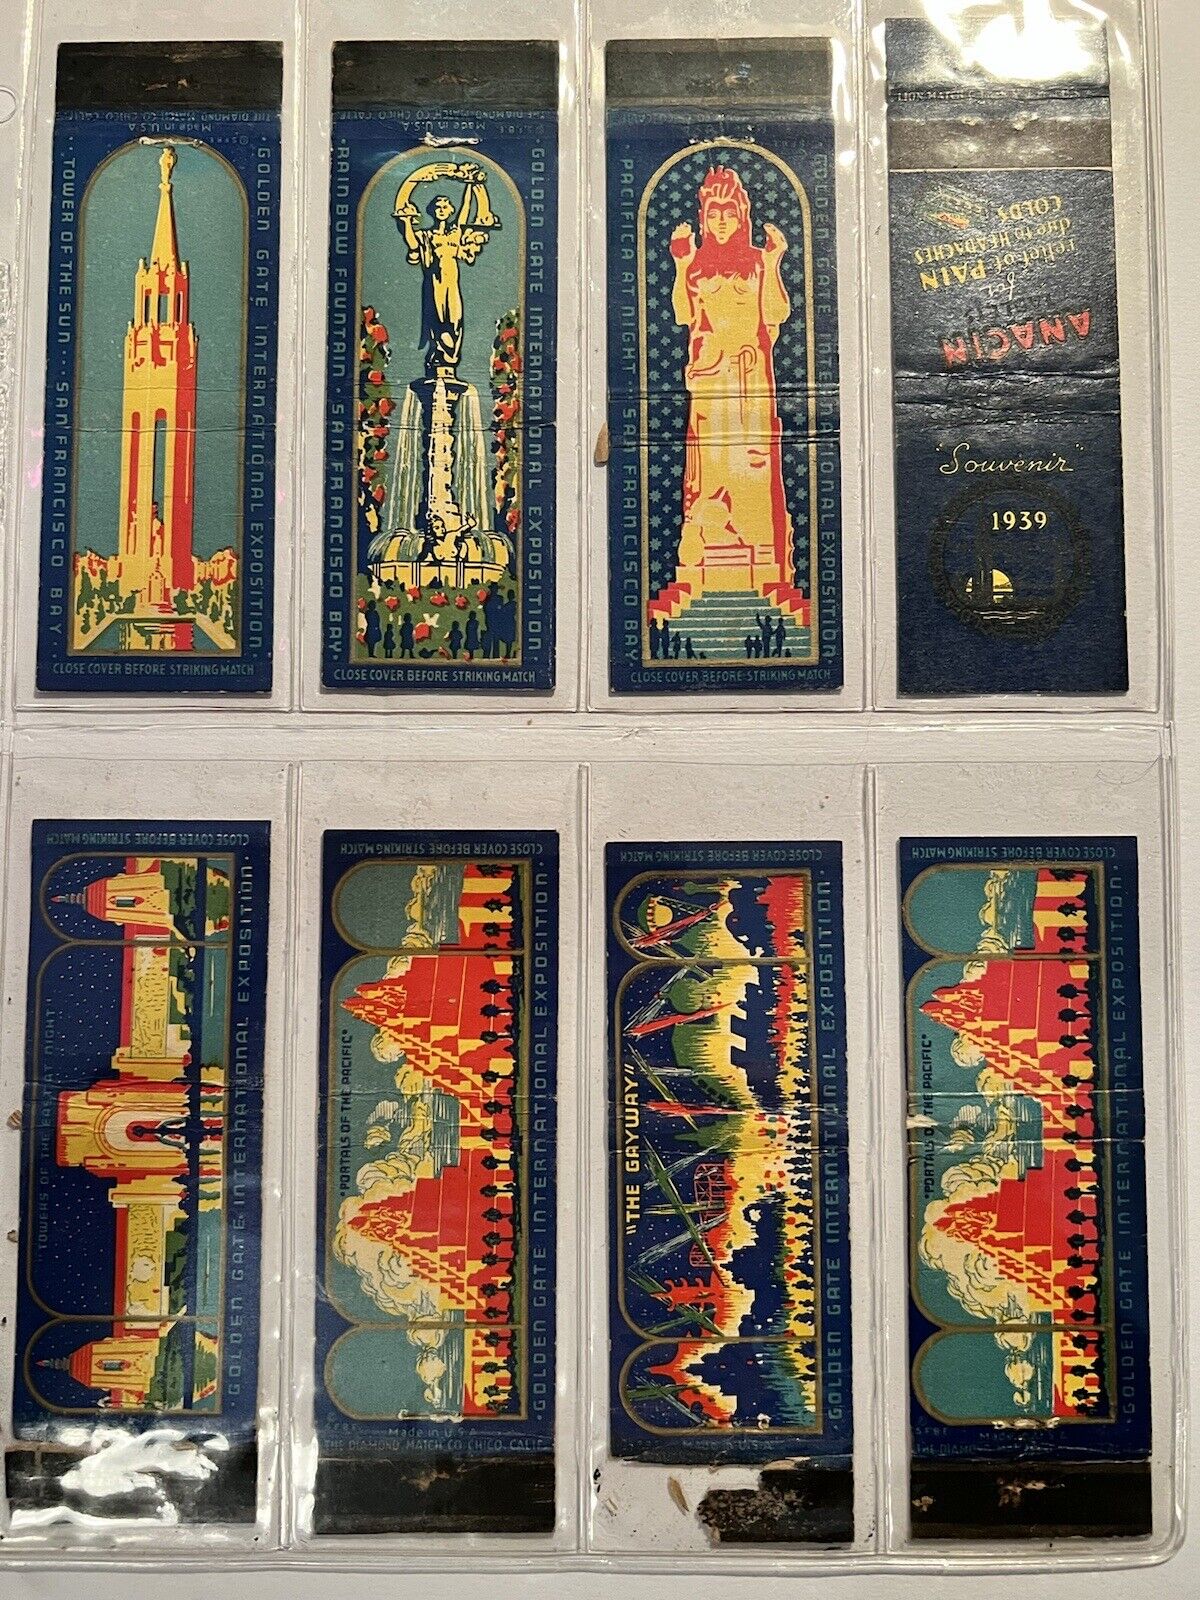 ~Vintage 1939 GOLDEN GATE SF EXPO matchbook Covers, Lot of 8